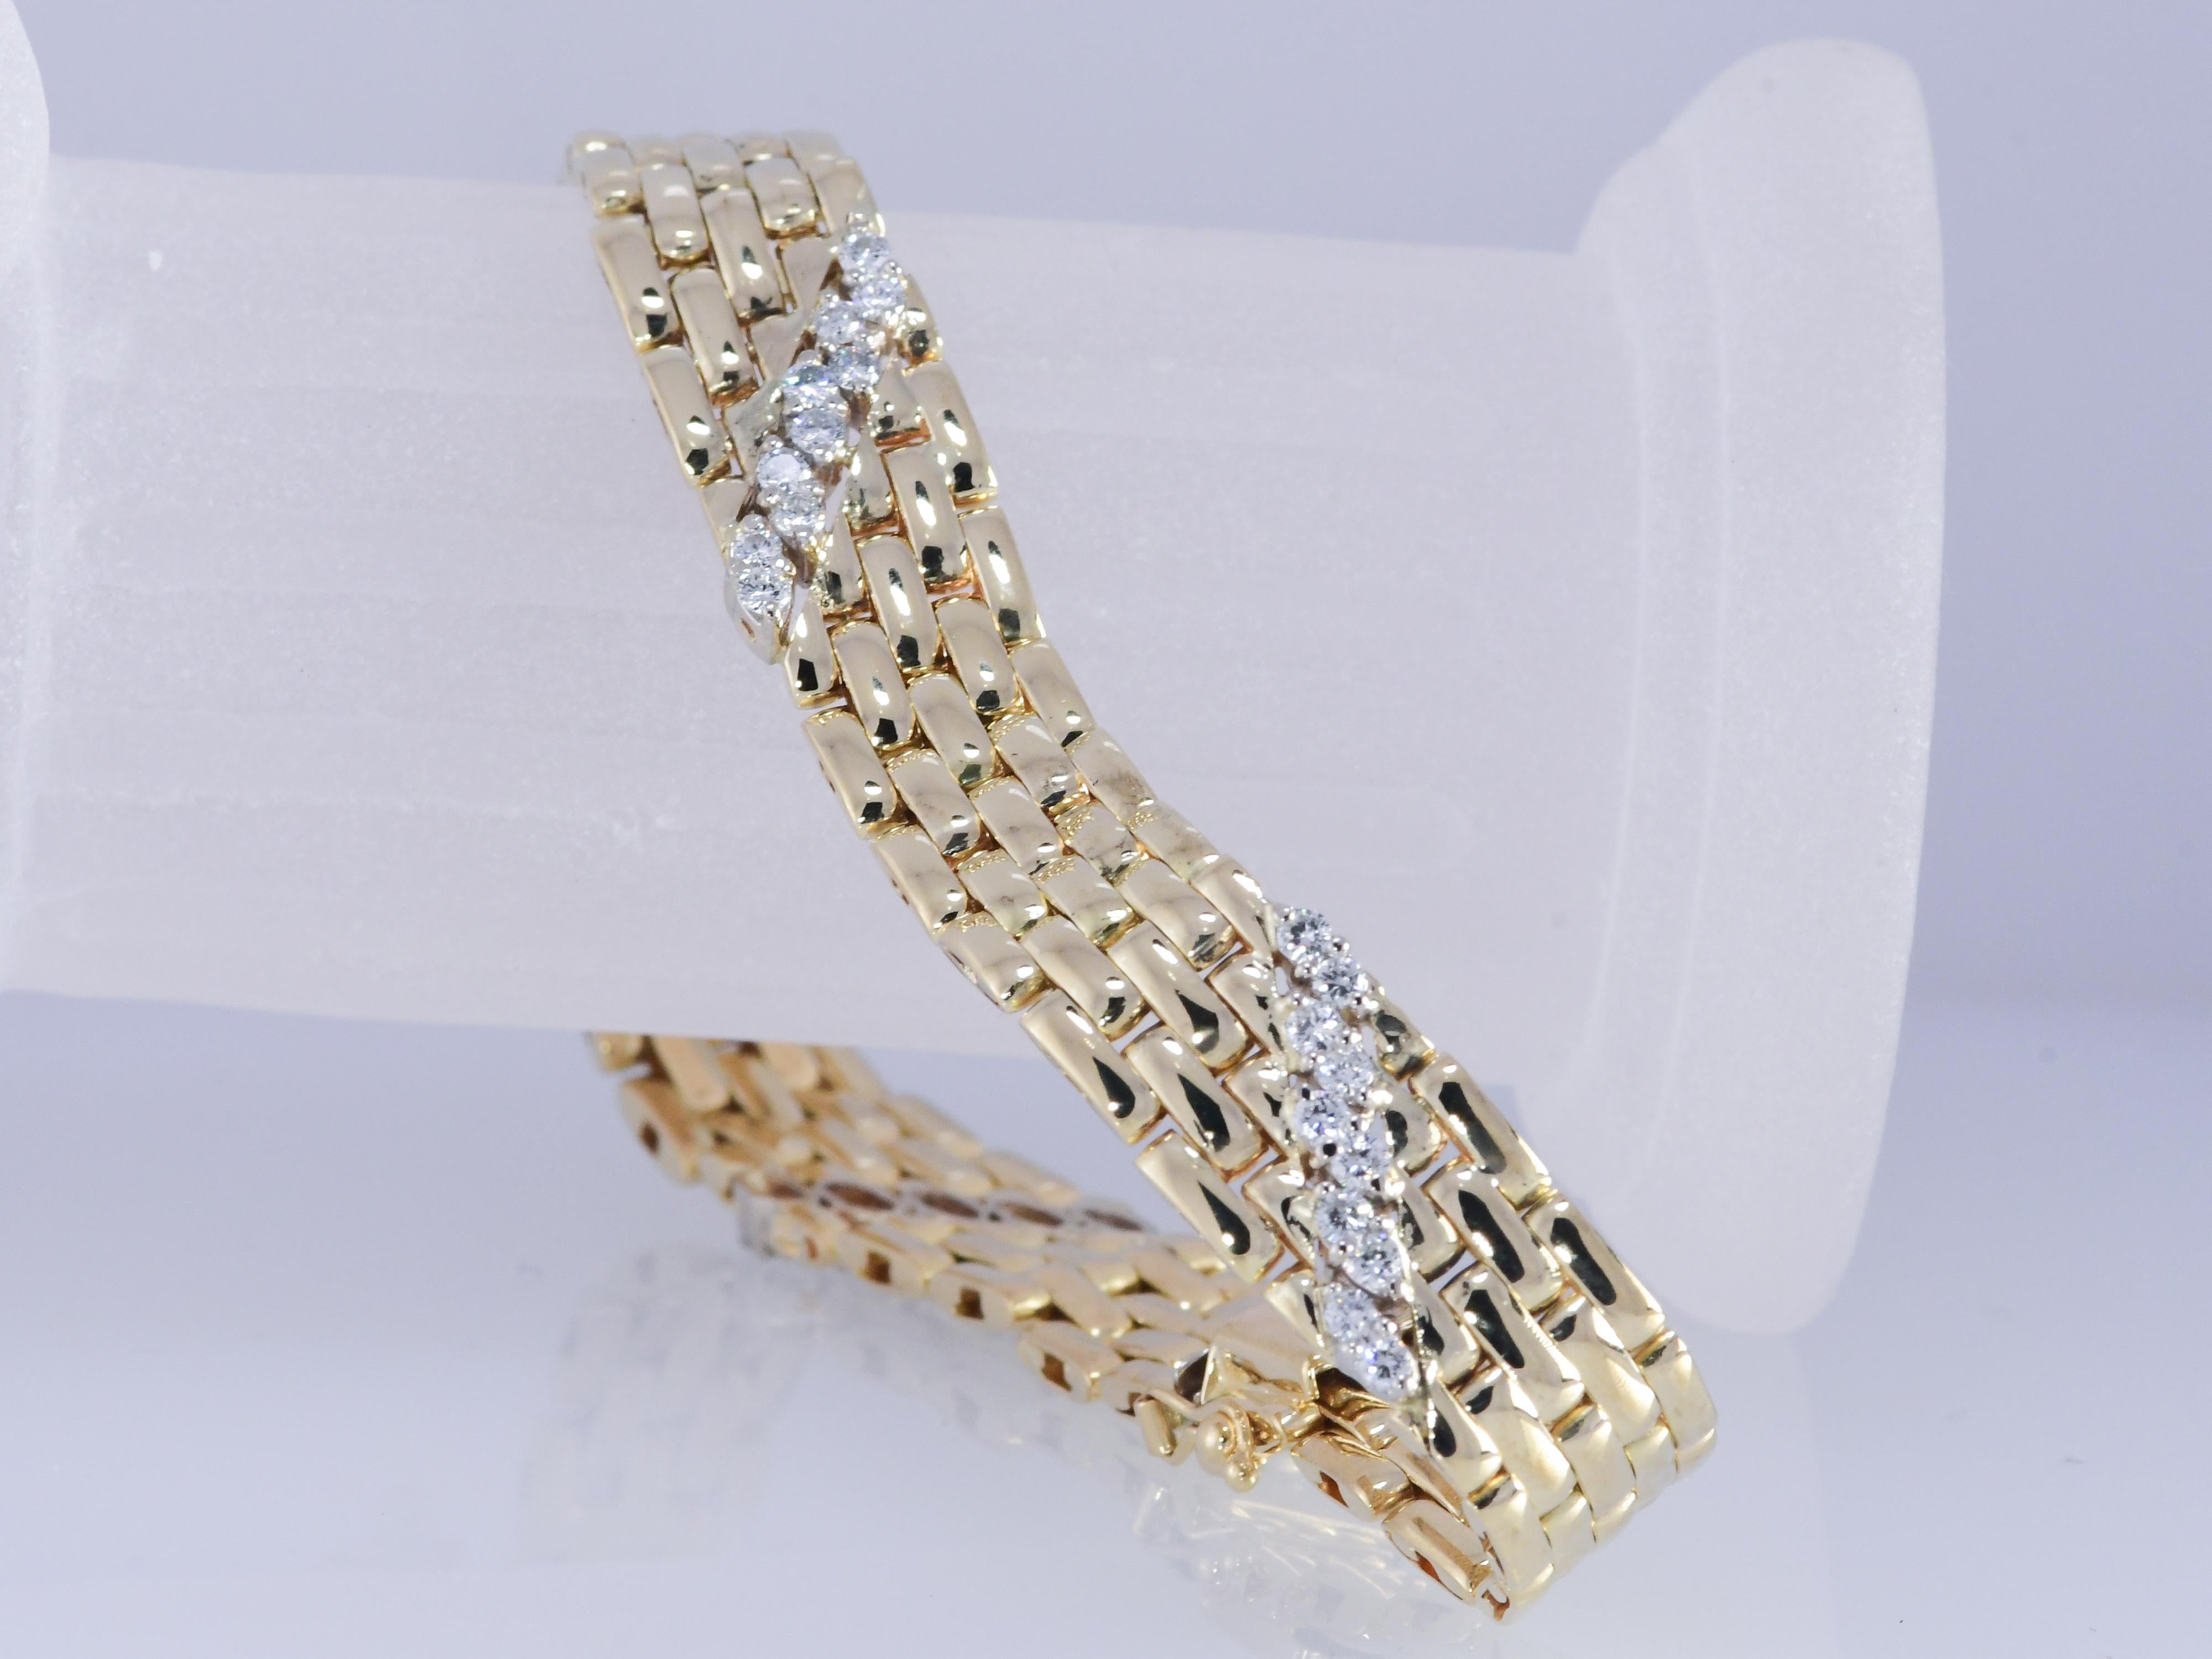 Fope jewelry based in Vicenza, Italy has been manufacturing designer 18 karat gold jewelry since 1929. This vintage five row panther link bracelet has four diagonal rows of round brilliant cut diamonds. The diamonds total 1.2 carat and are VS1-SI2;